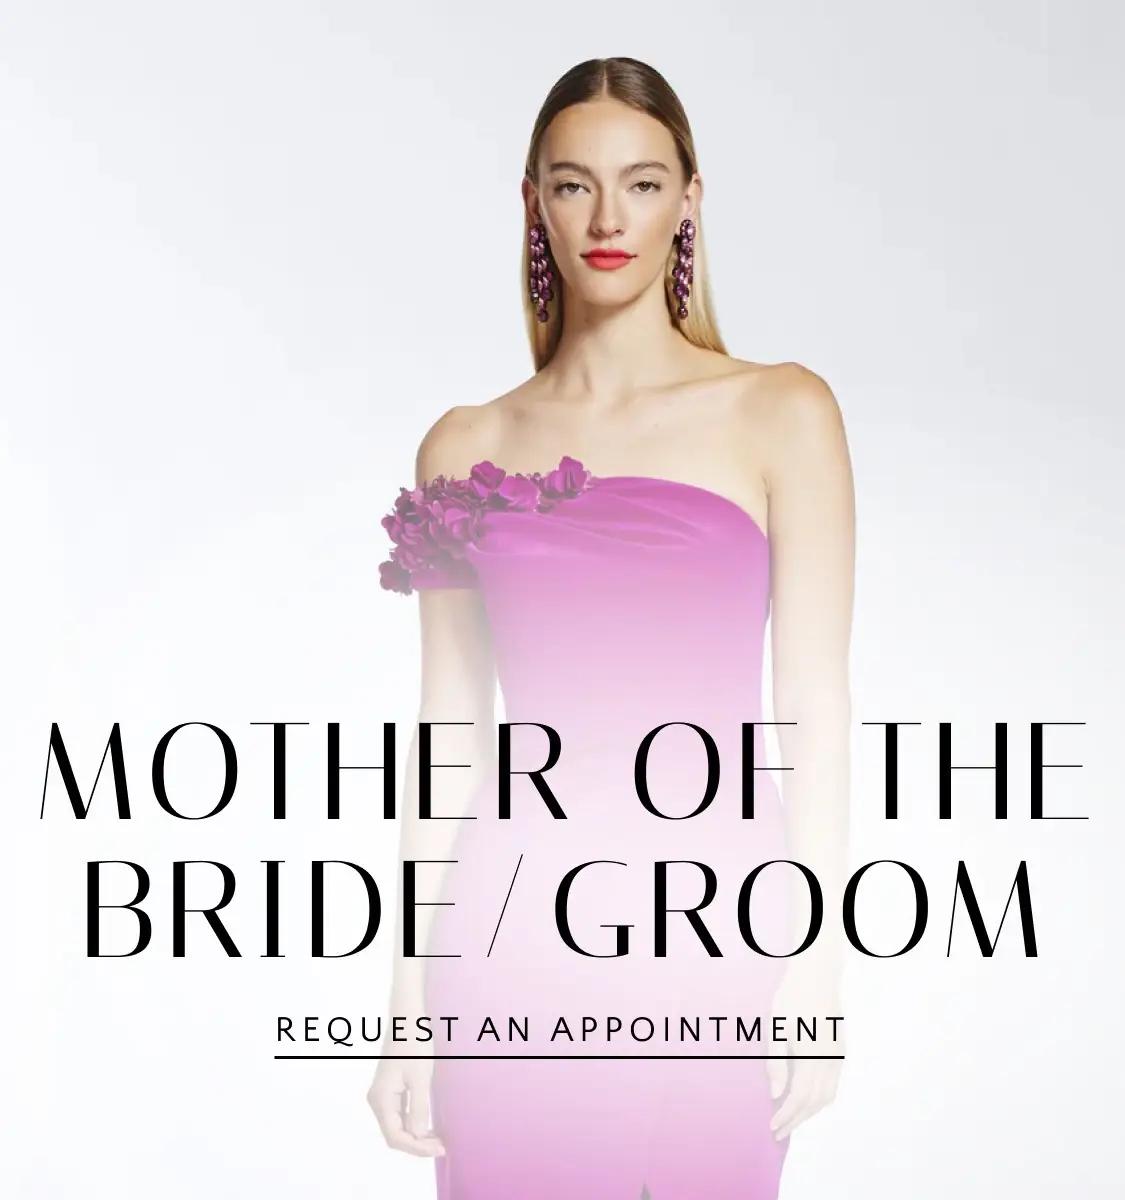 mother of the bride/groom banner for mobile